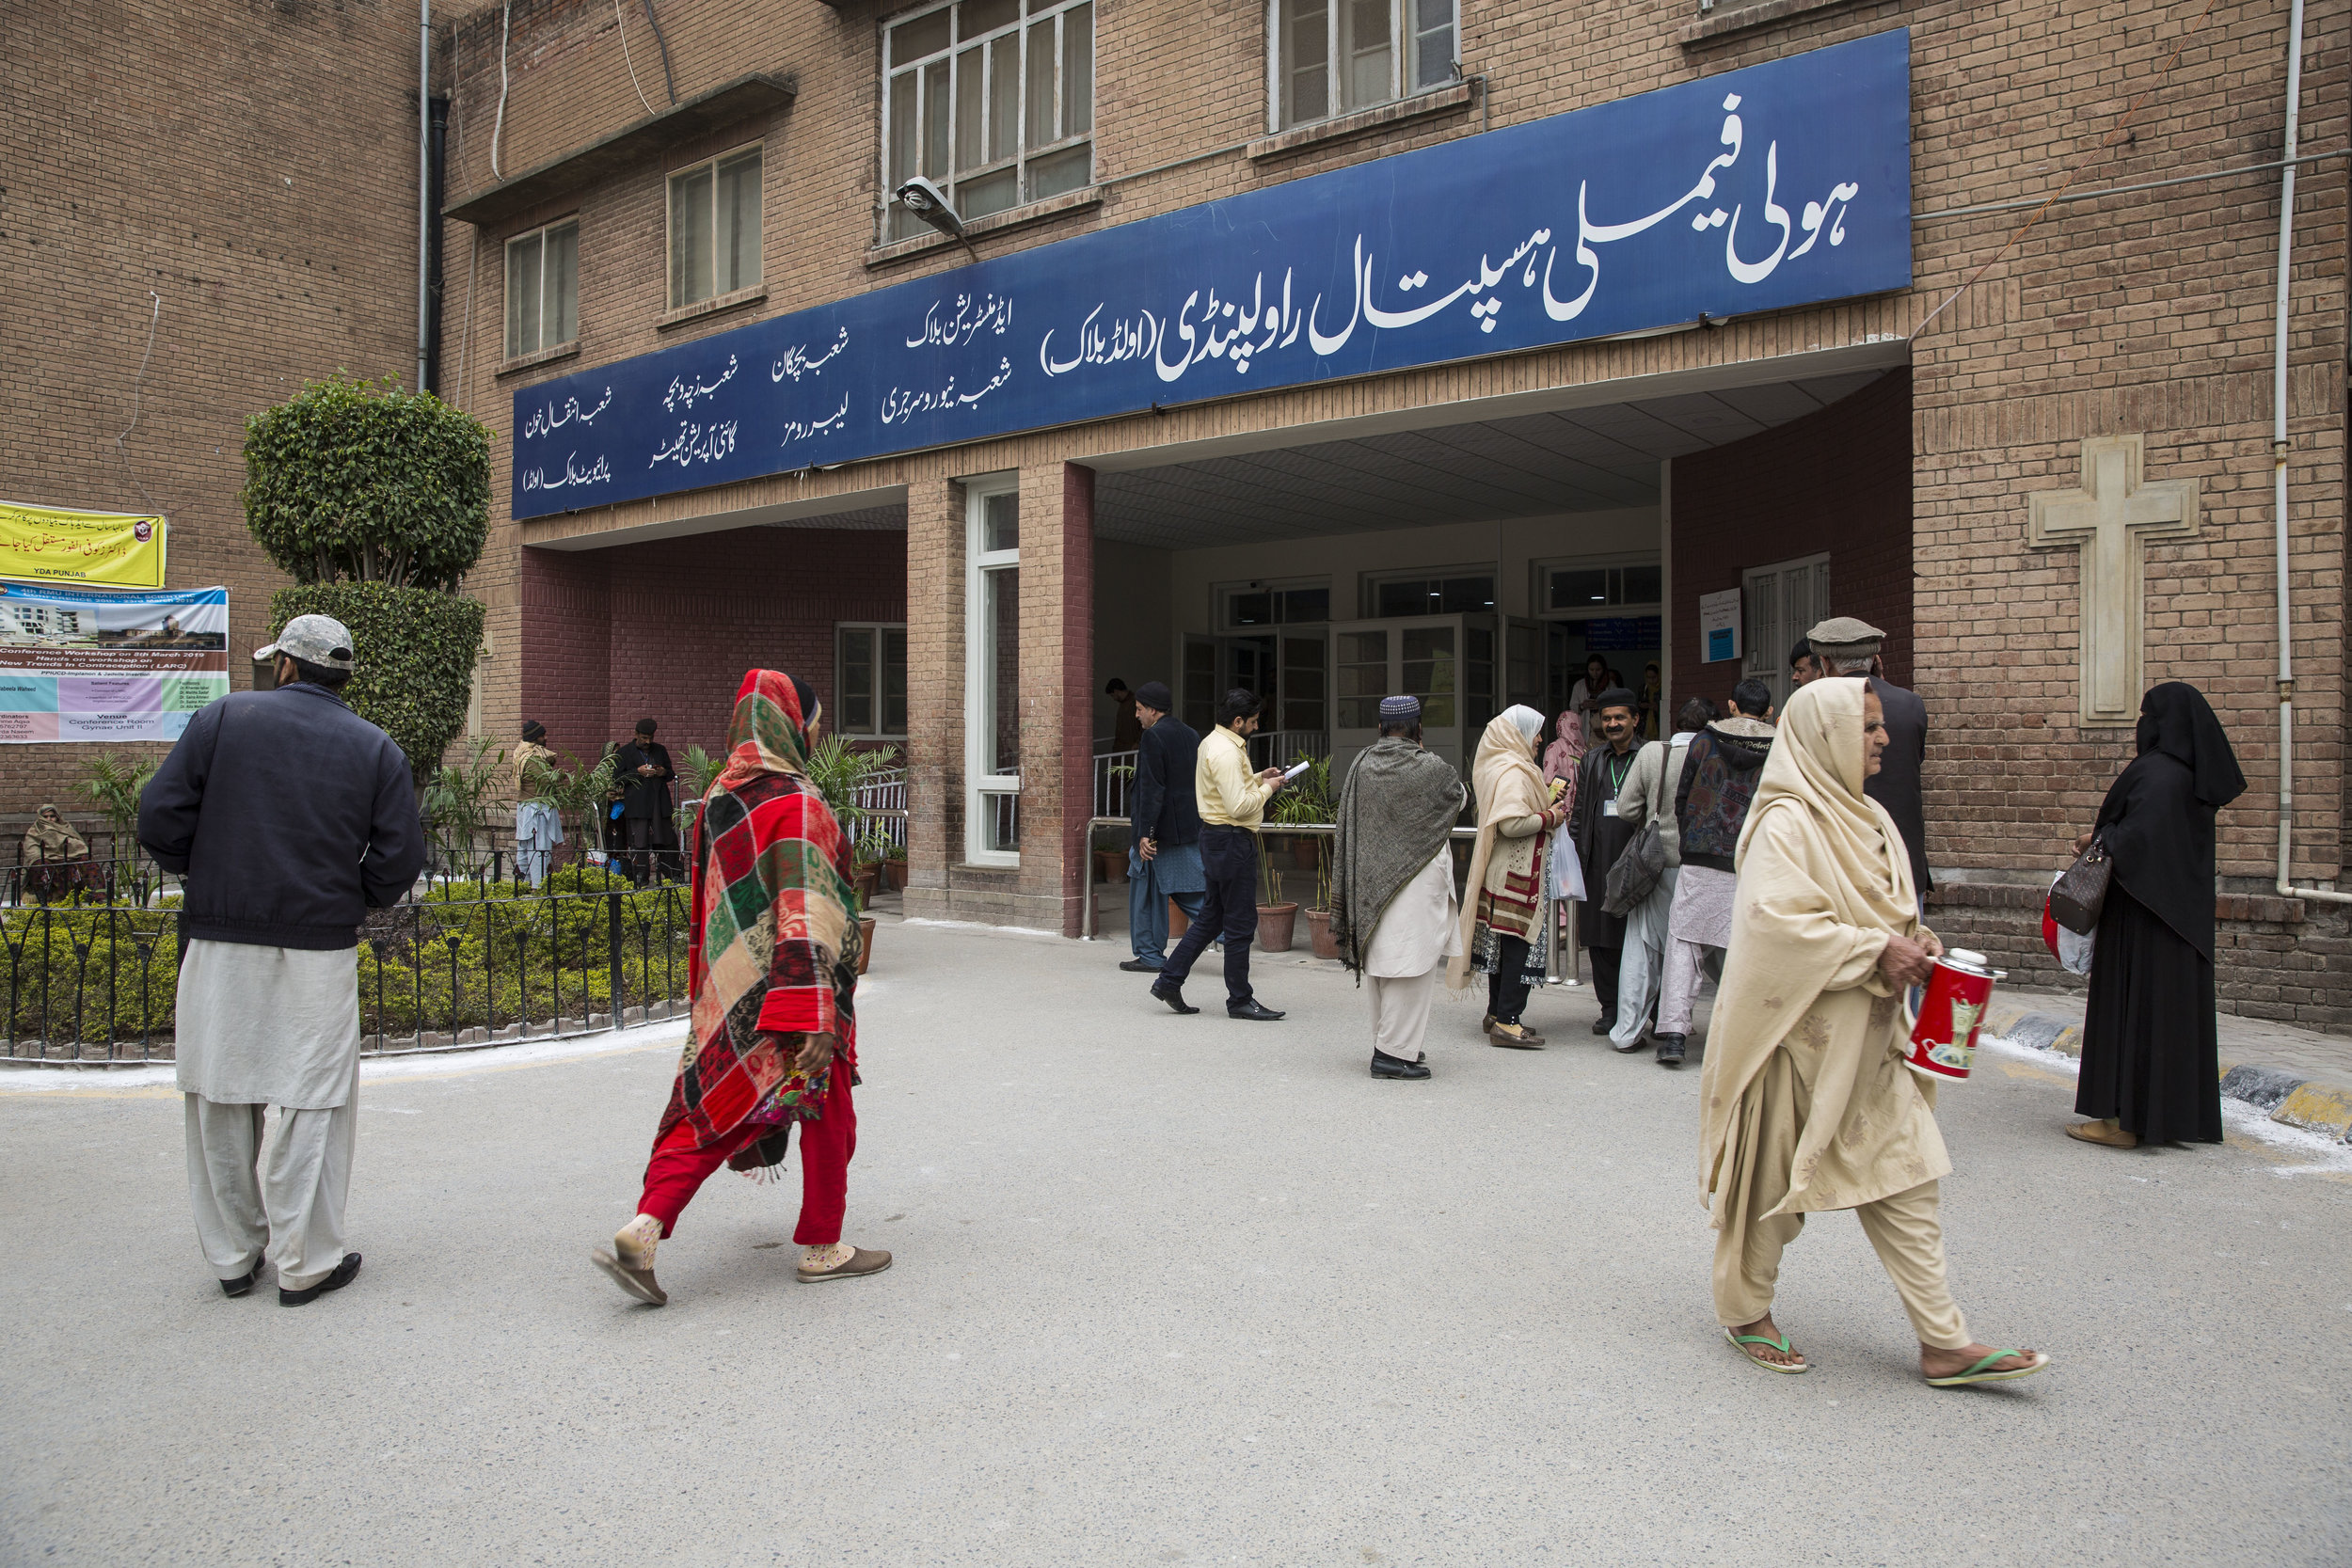  Holy Family Hospital, where women are being treated with a life-saving drug call Tranxamin which prevents postpartum haemorrhaging on March 14, 2019 in Rawalpindi, Pakistan.  